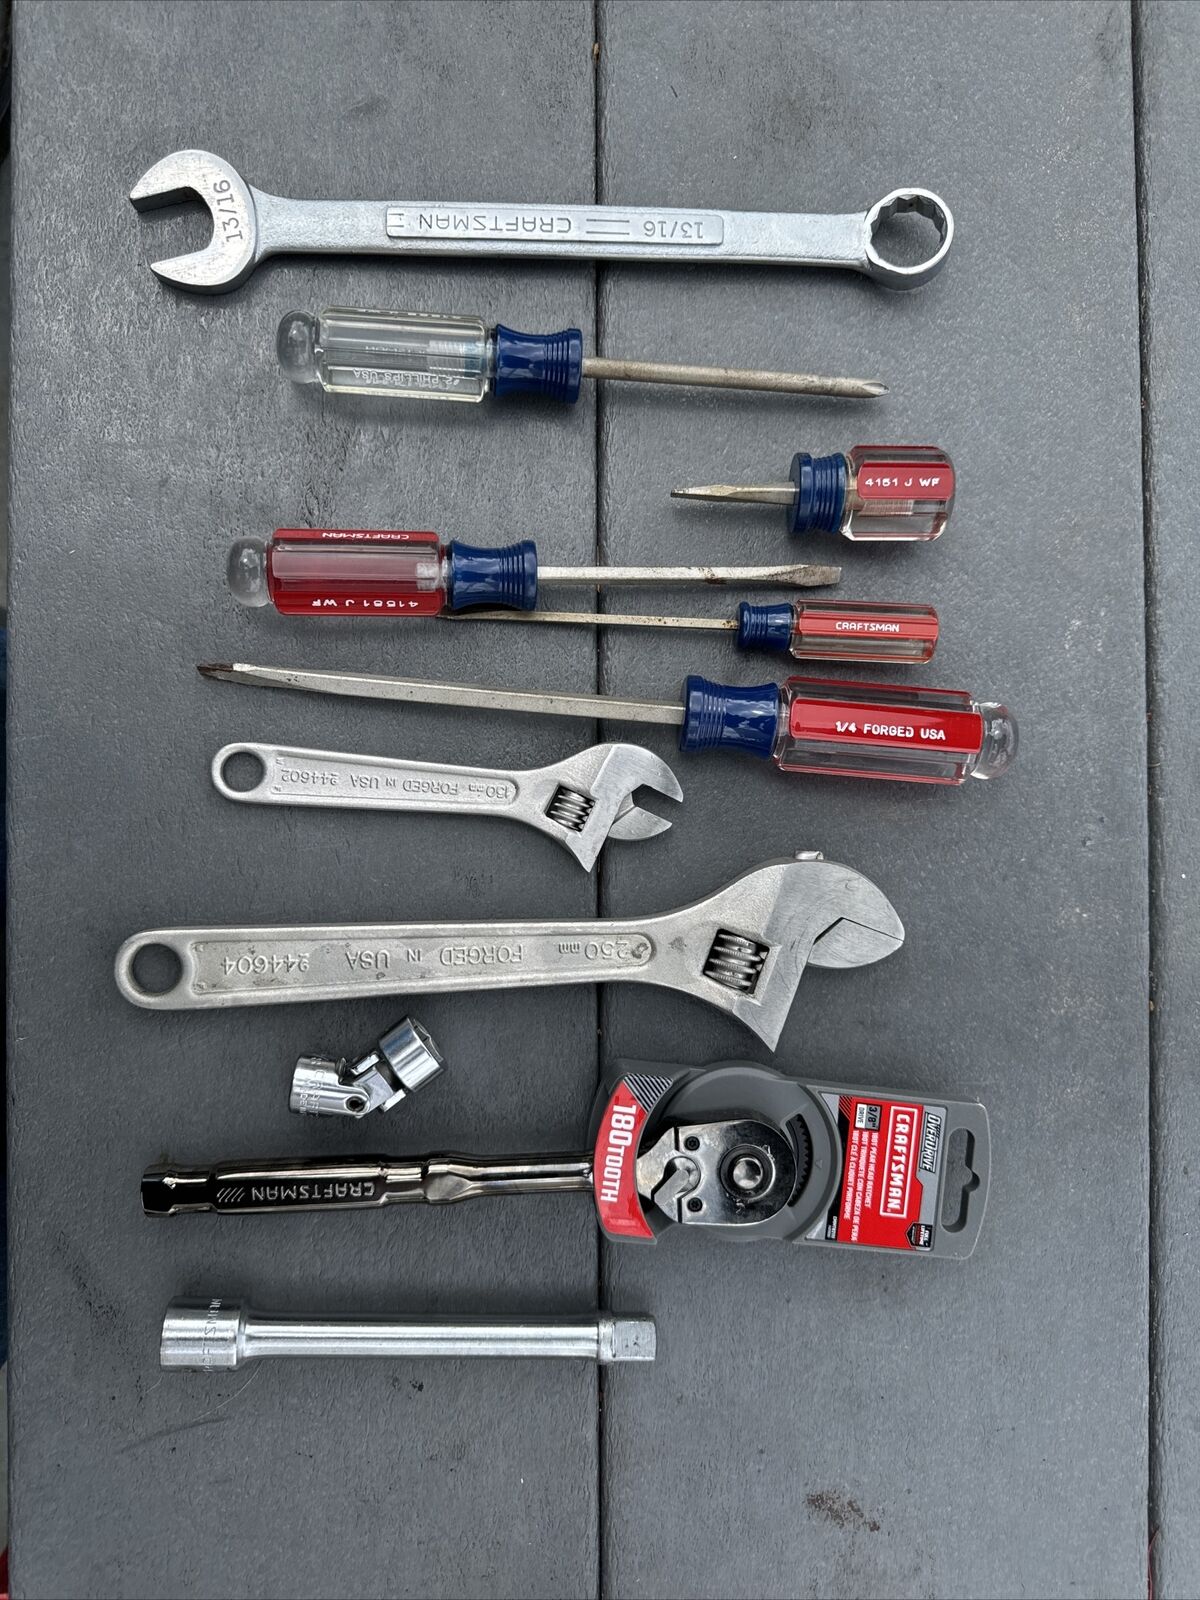 Sears Craftsman USA Tool Lot Screwdrivers Wrenches Swivel Socket Extension Vint